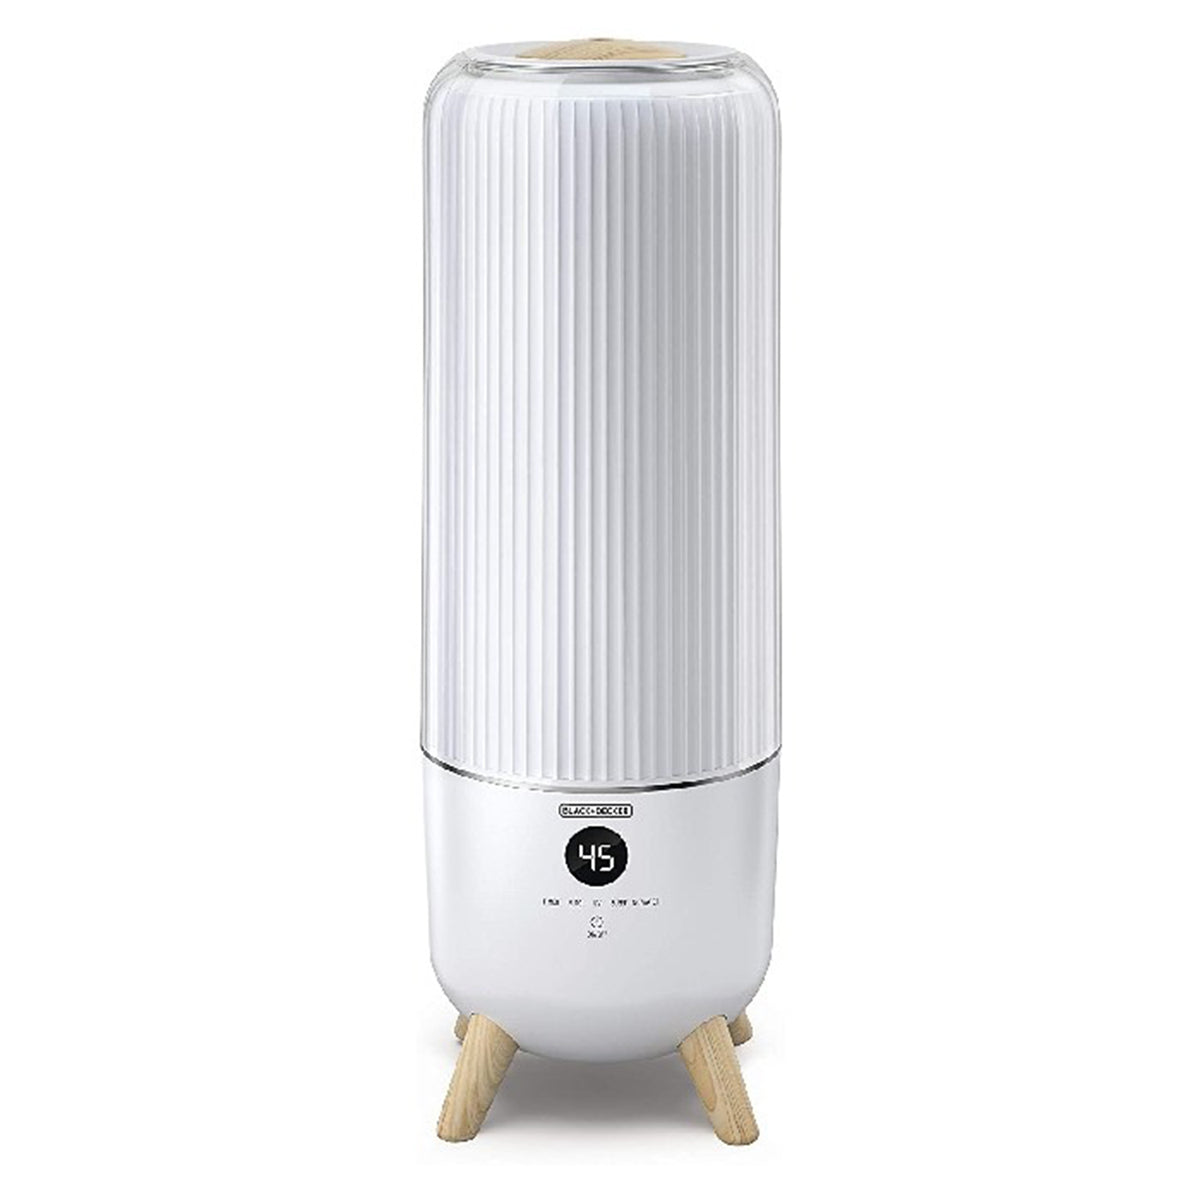 Digital Humidifier 6L with Remote ControlCapacity: 6 Liters